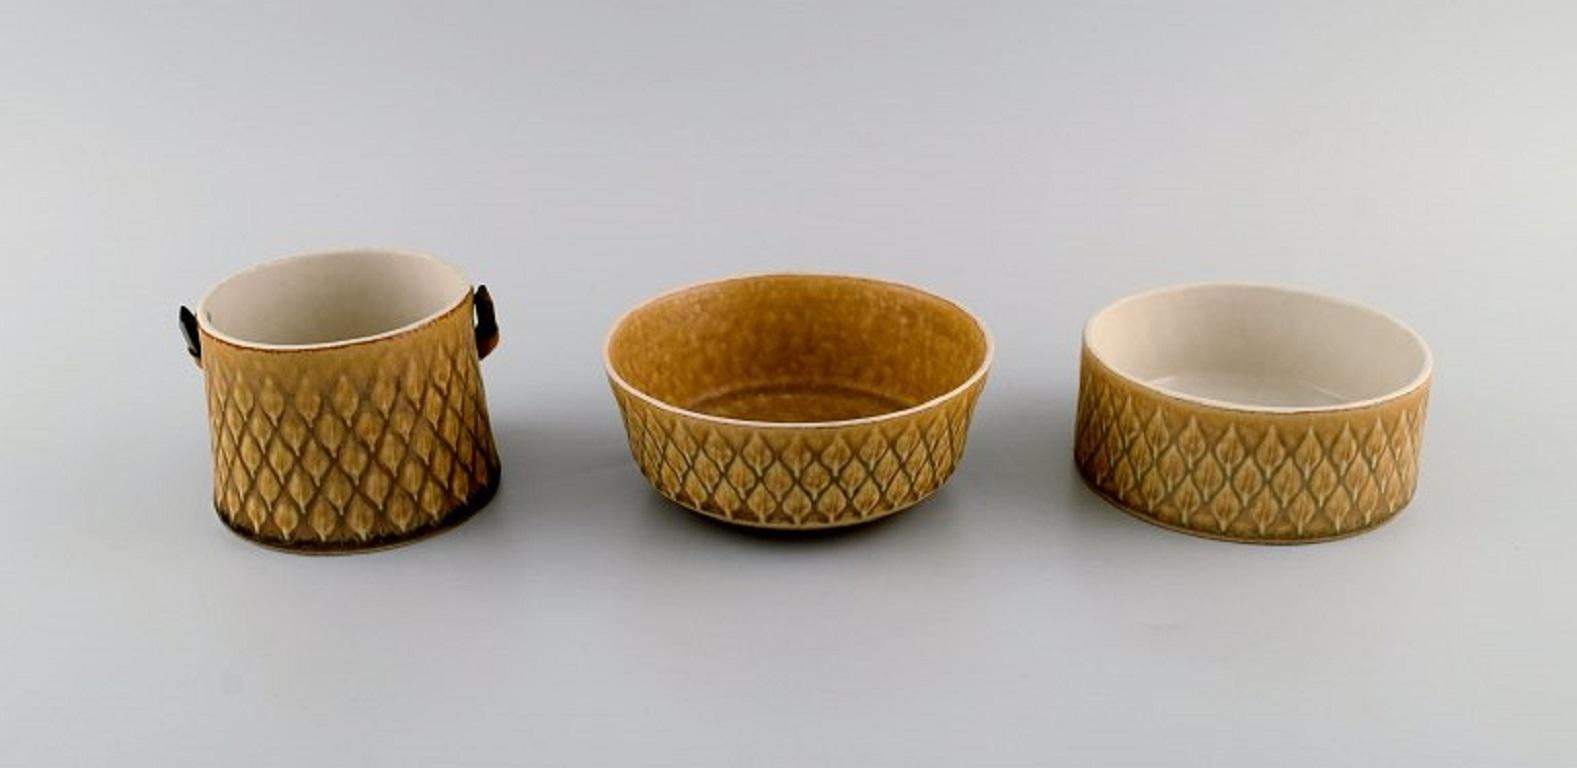 Jens H. Quistgaard (1919-2008) for Bing & Grøndahl / Nissen Kronjyden. 
Three Relief bowls in glazed stoneware. Beautiful glaze in mustard yellow shades. 1960s.
The sugar bowl measures: 10 x 7.5 cm (ex. Handle).
Largest low bowl measures: 13 x